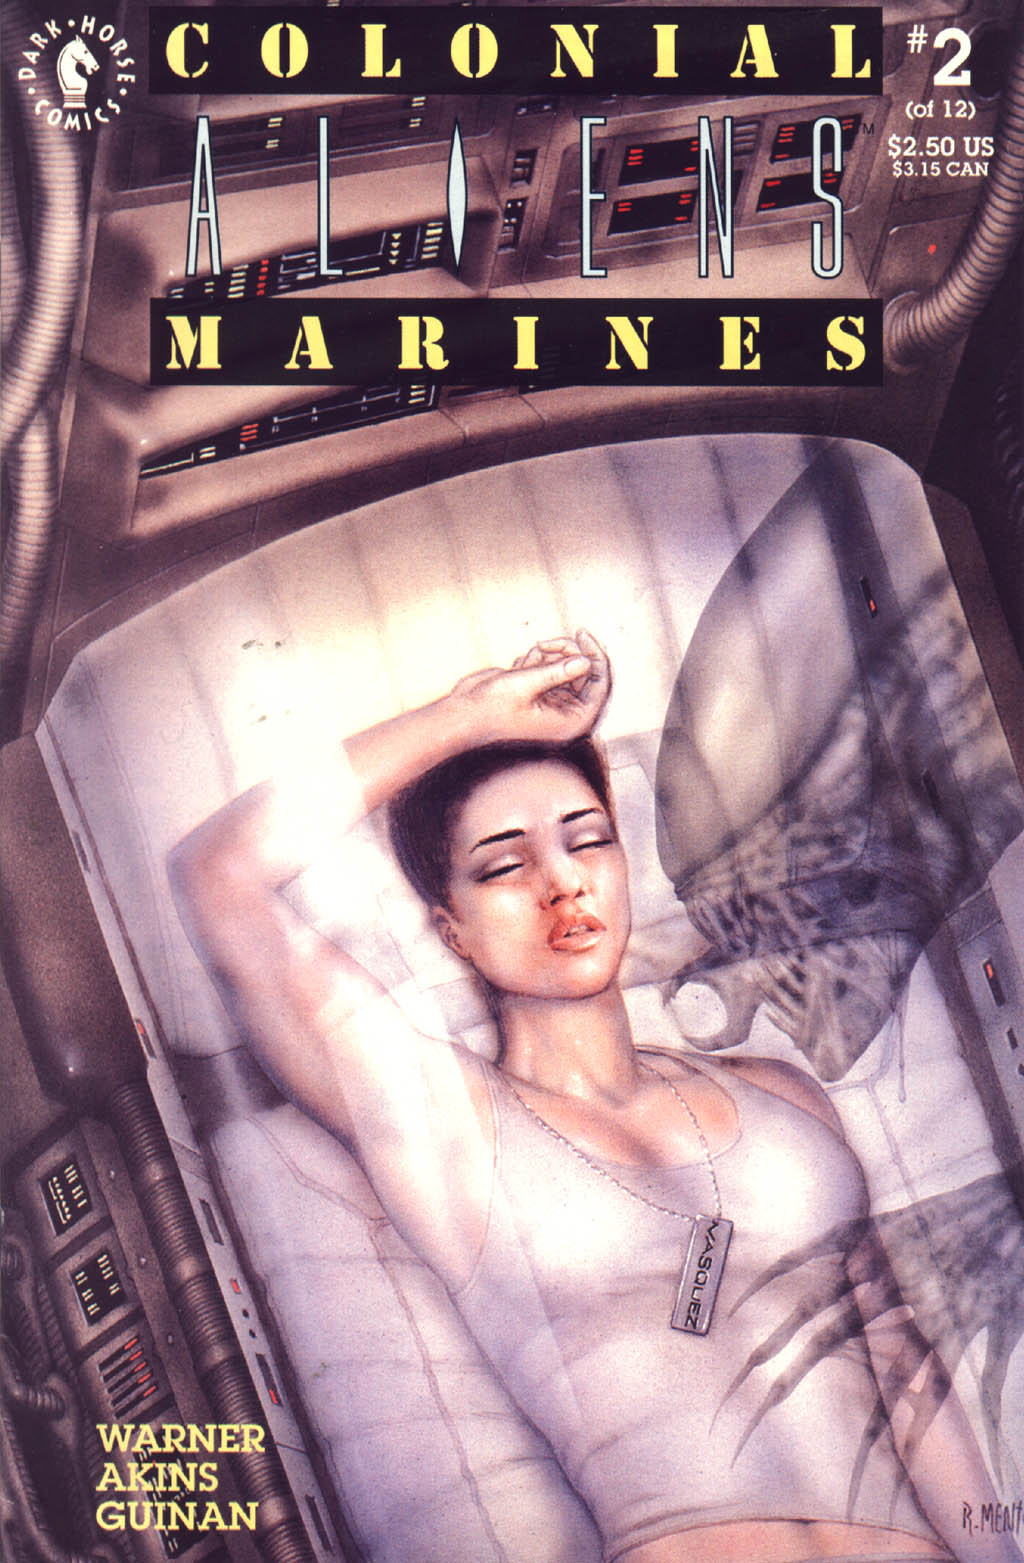 1024px x 1563px - Aliens Colonial Marines 02 | Read Aliens Colonial Marines 02 comic online  in high quality. Website to search, classify, summarize, and evaluate comics .